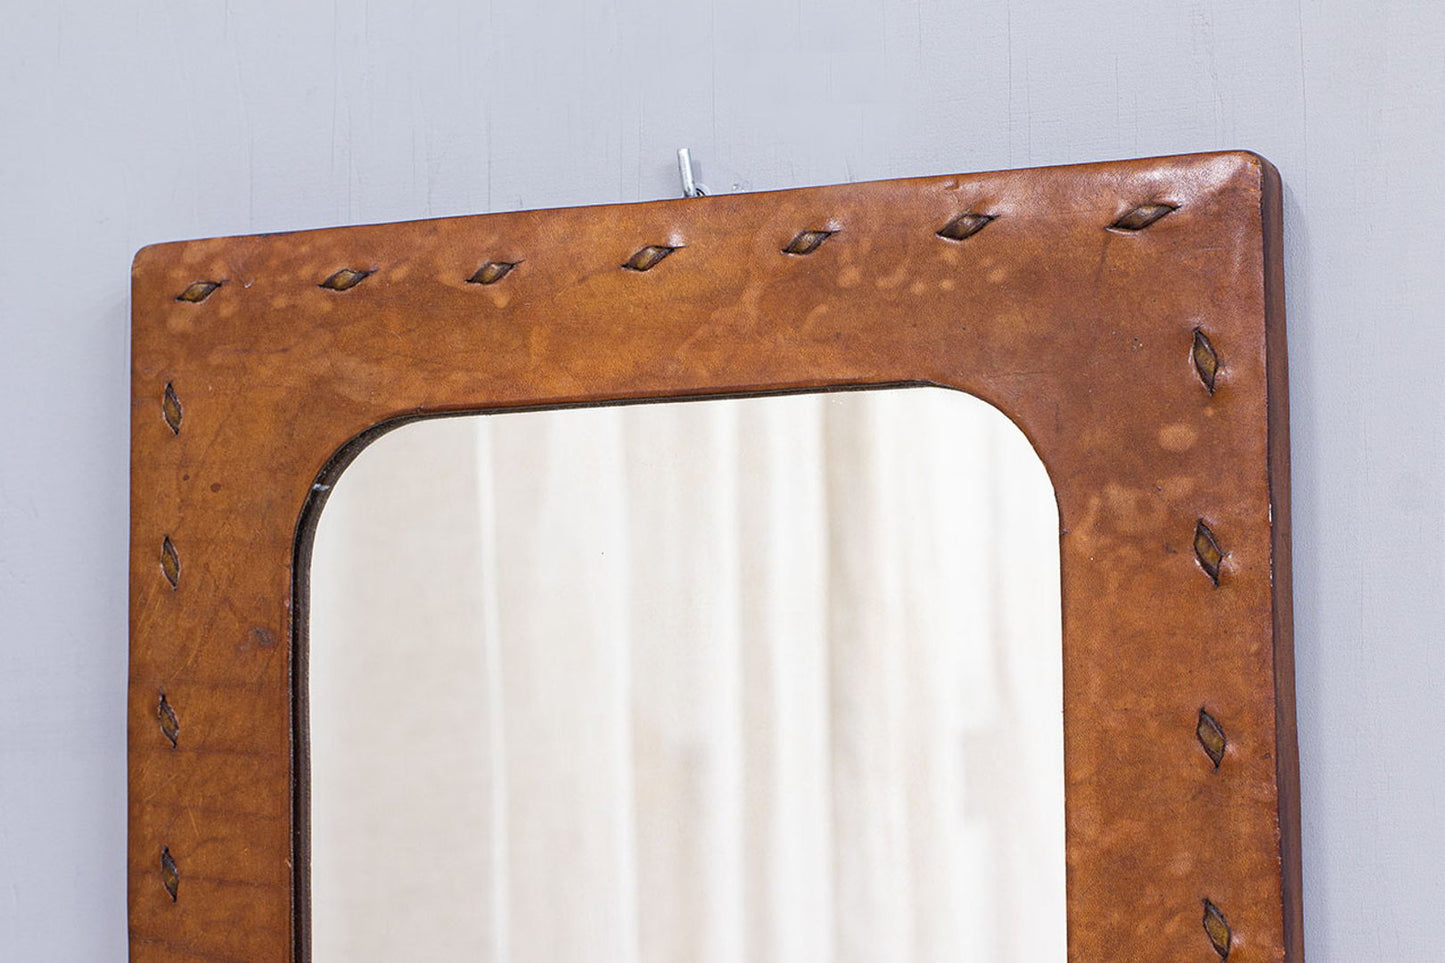 Vintage French Leather-Covered Wall Mirror from the 1950s